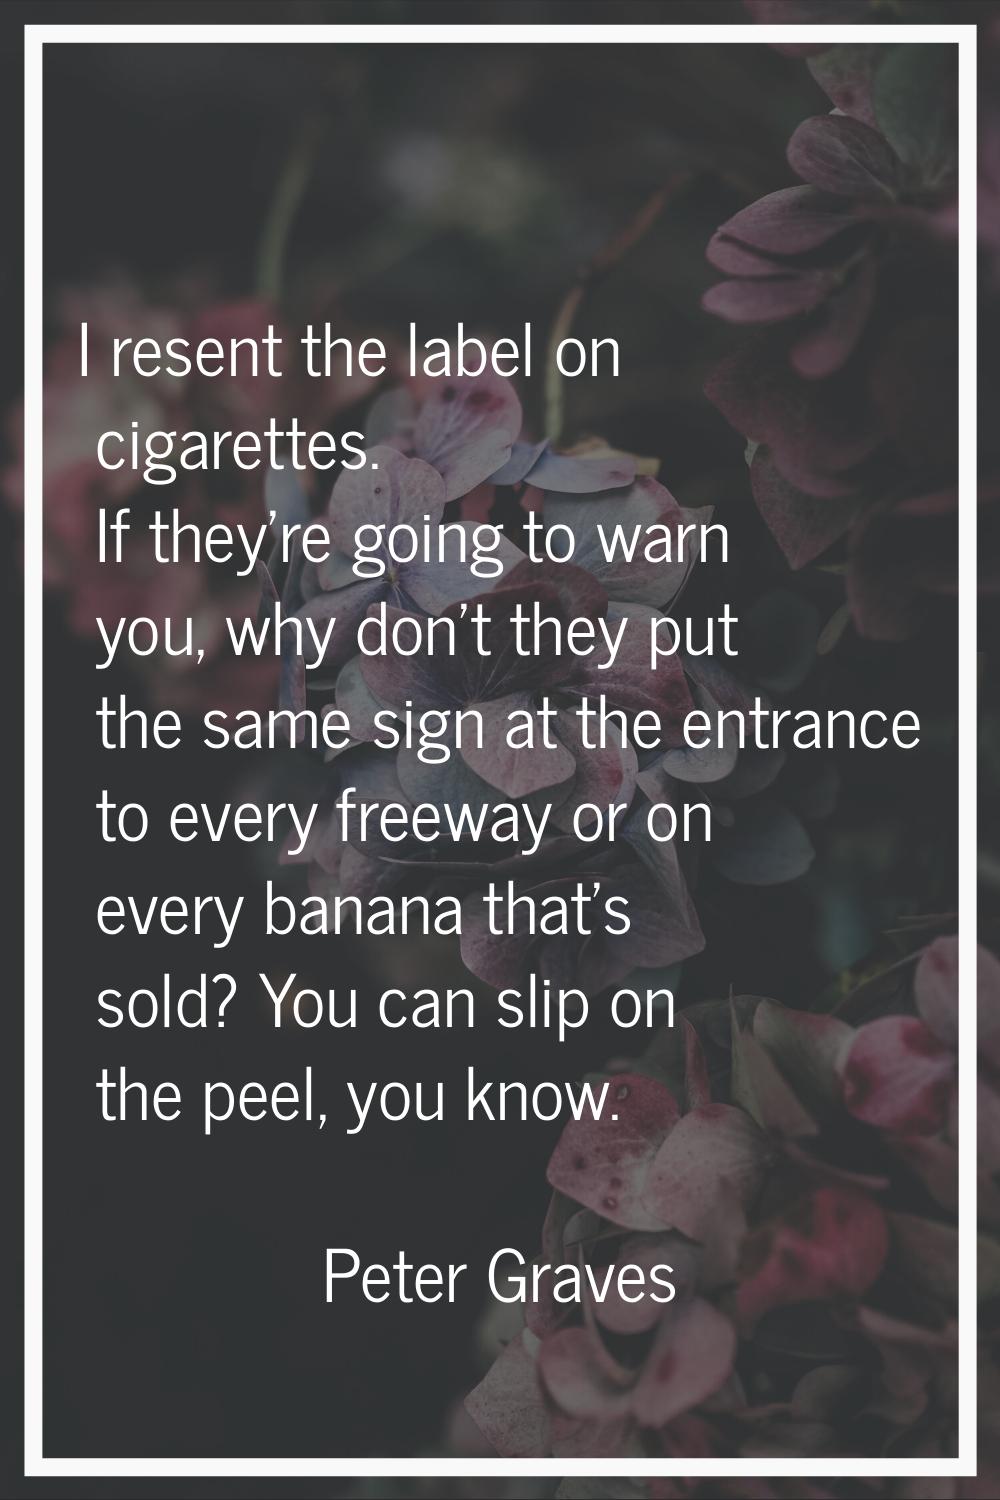 I resent the label on cigarettes. If they're going to warn you, why don't they put the same sign at